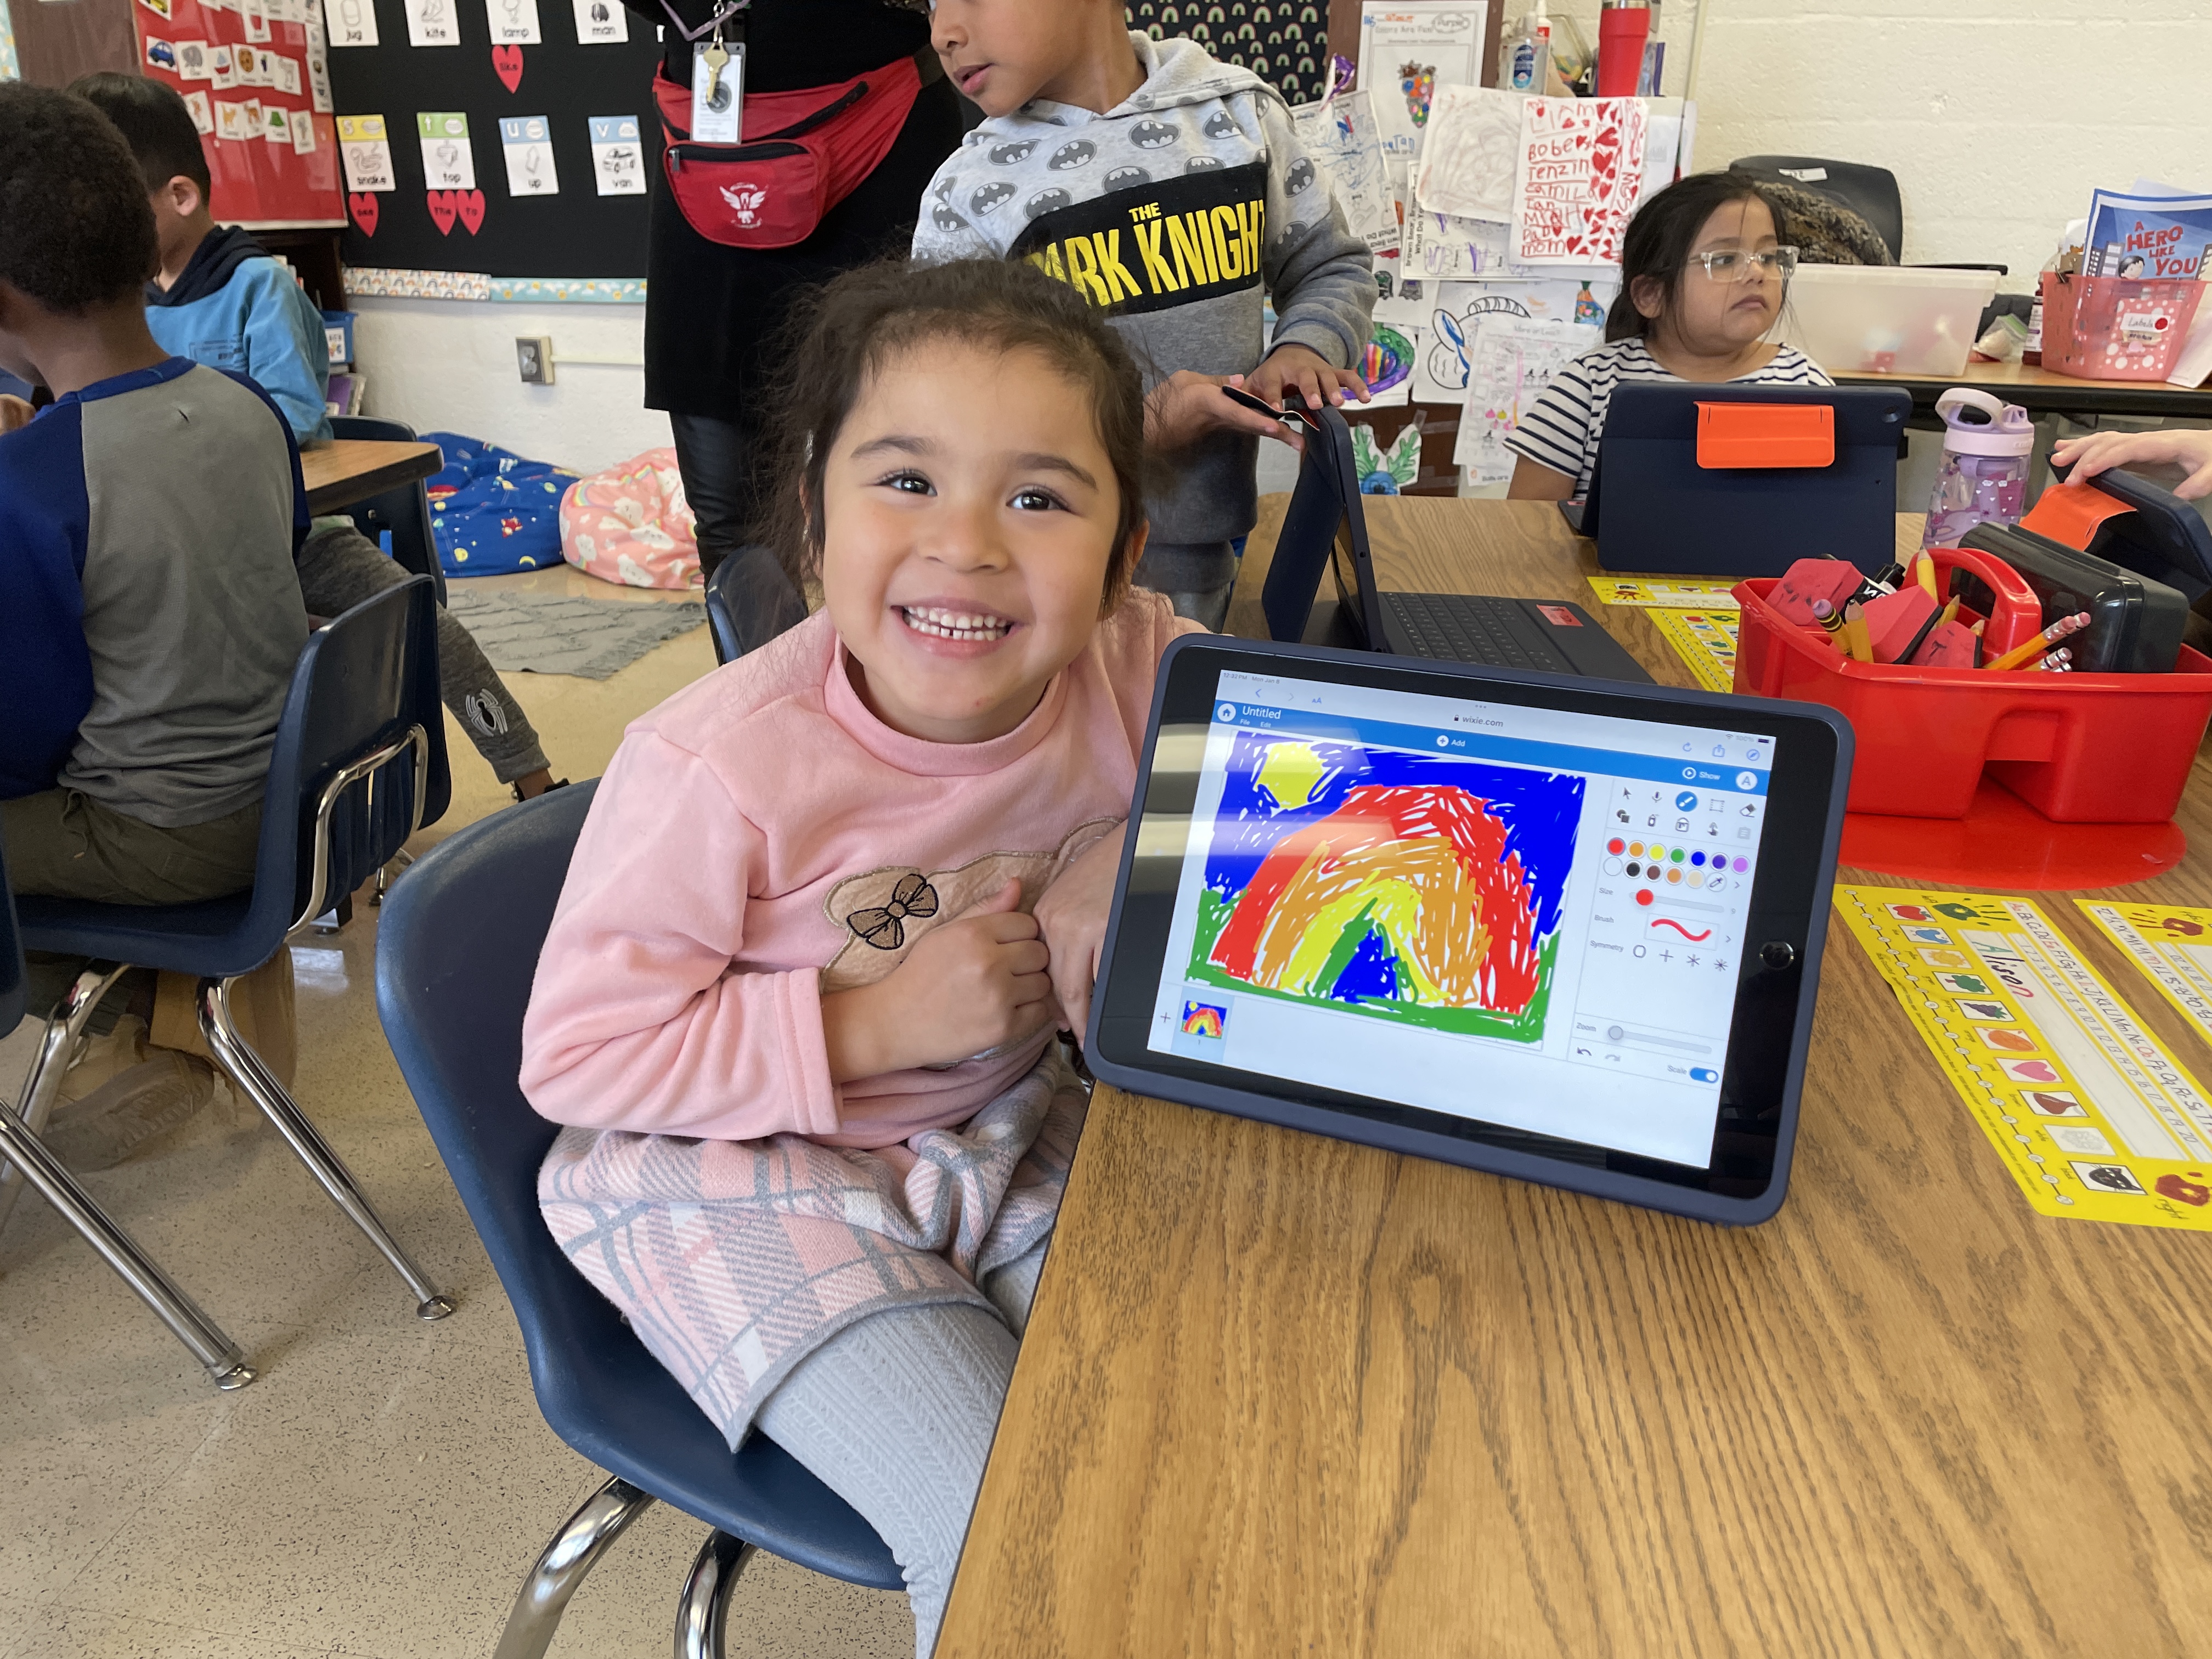 Kindergarten student proudly shows off the rainbow she drew in Wixie